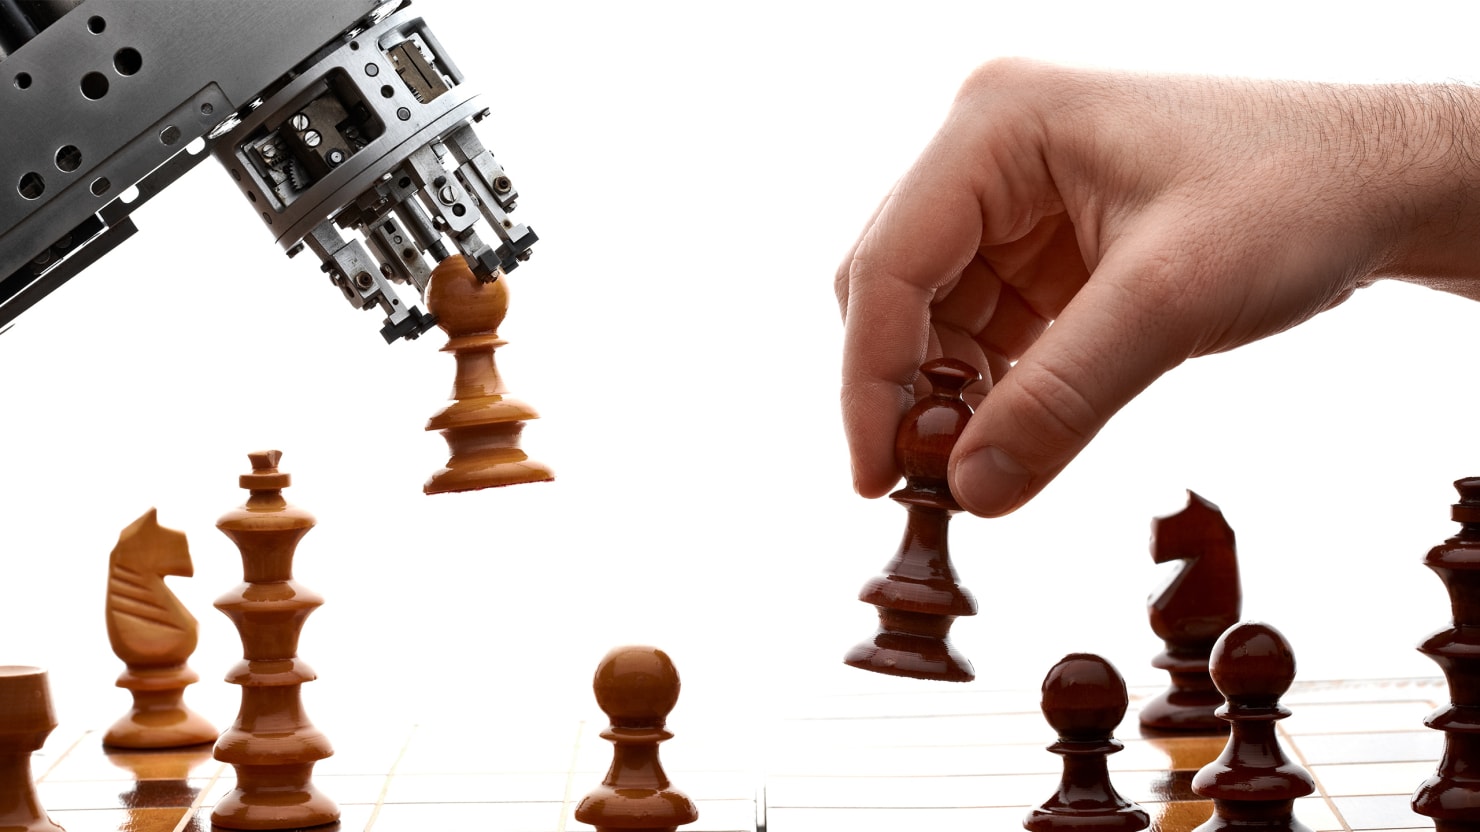 Don’t Pass Go: AI Will Beat You at Pretty Much Everything